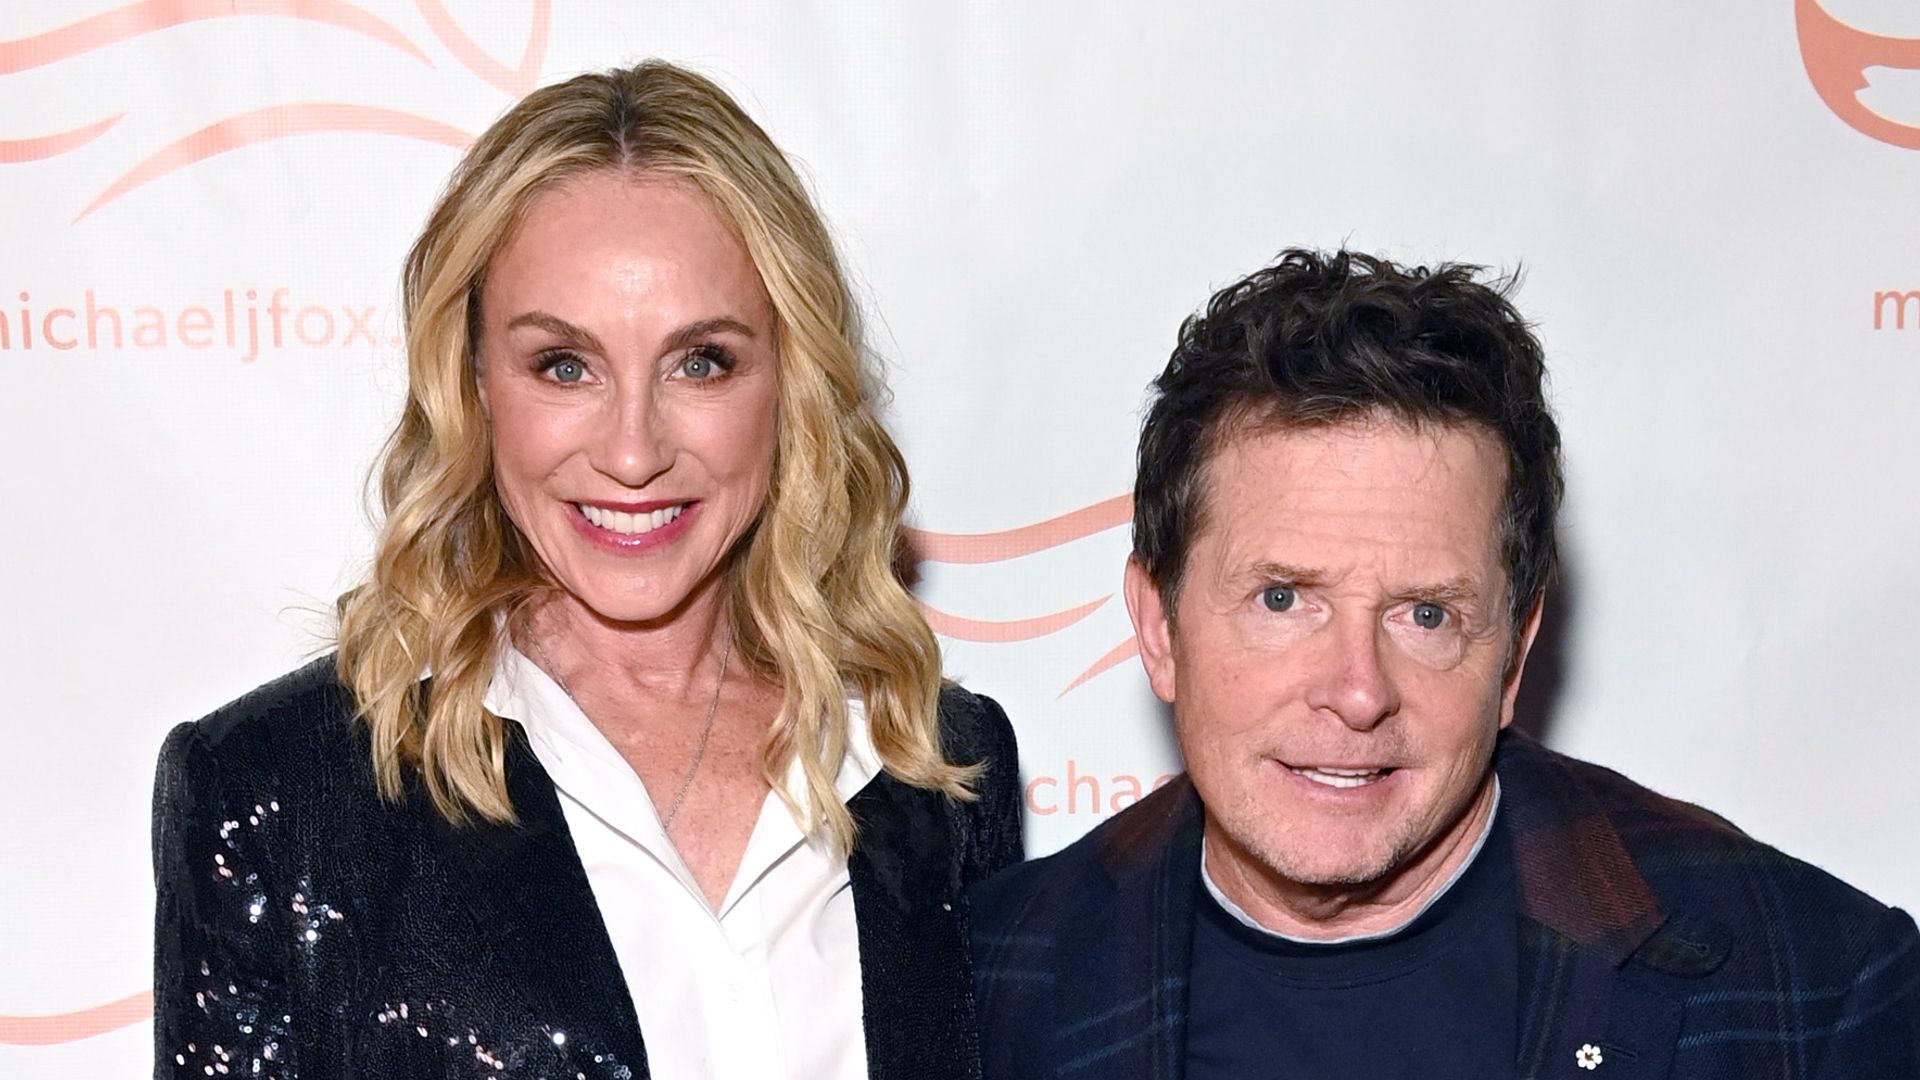 Michael J. Fox is all smiles during star-studded night out with wife Tracy Pollan